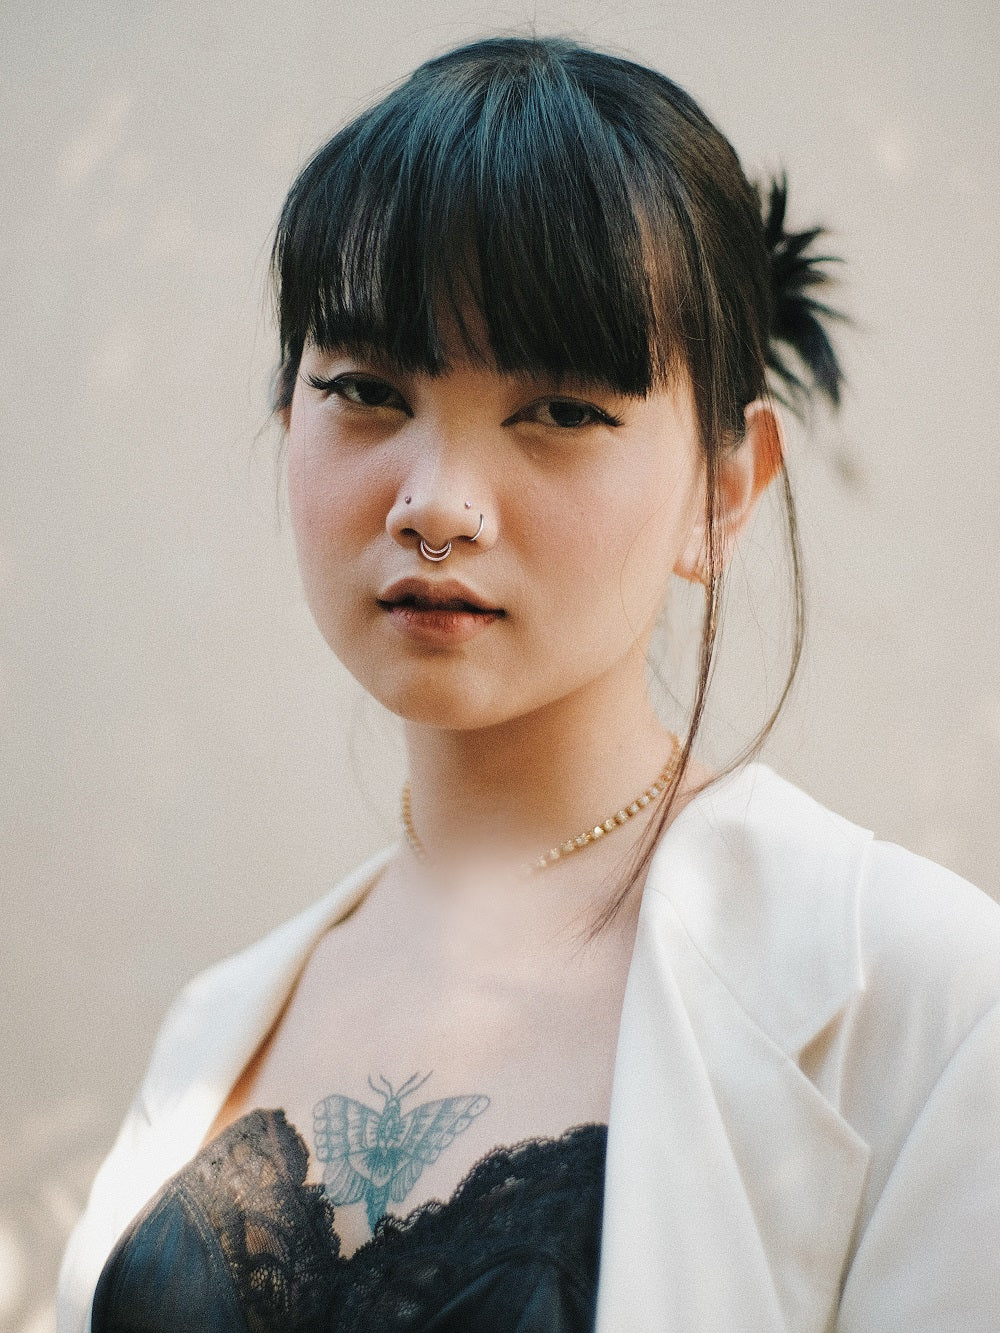 Young woman wears facial body jewelry and body piercing jewelry from bm25.com